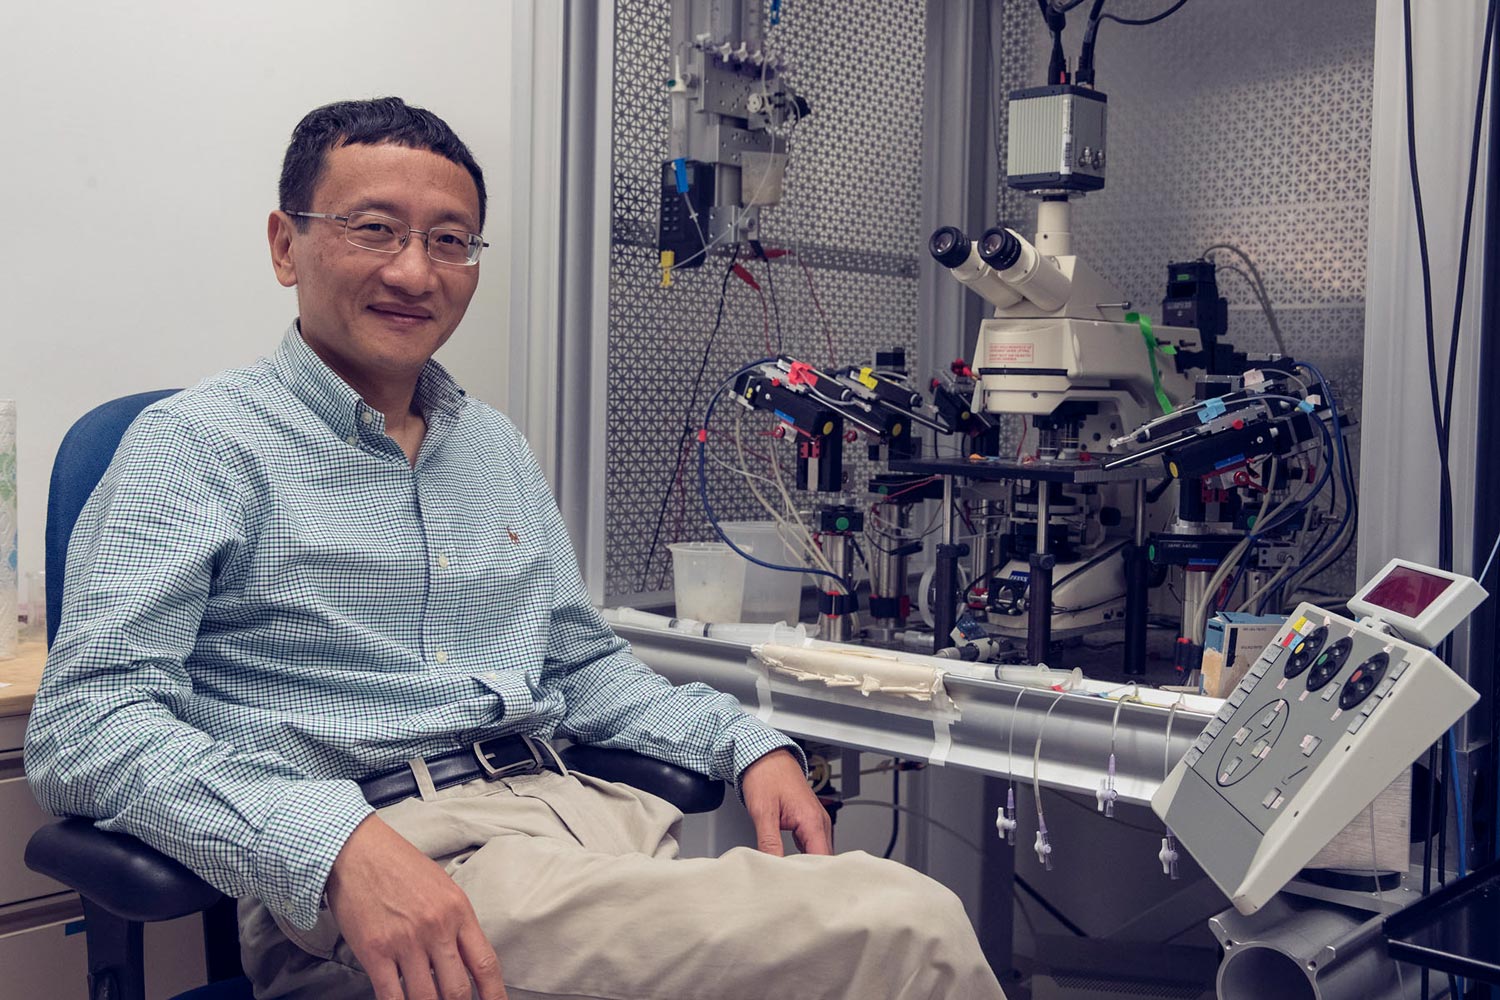 J. Julius Zhu sits in a chair next to a microscope looking at the camera